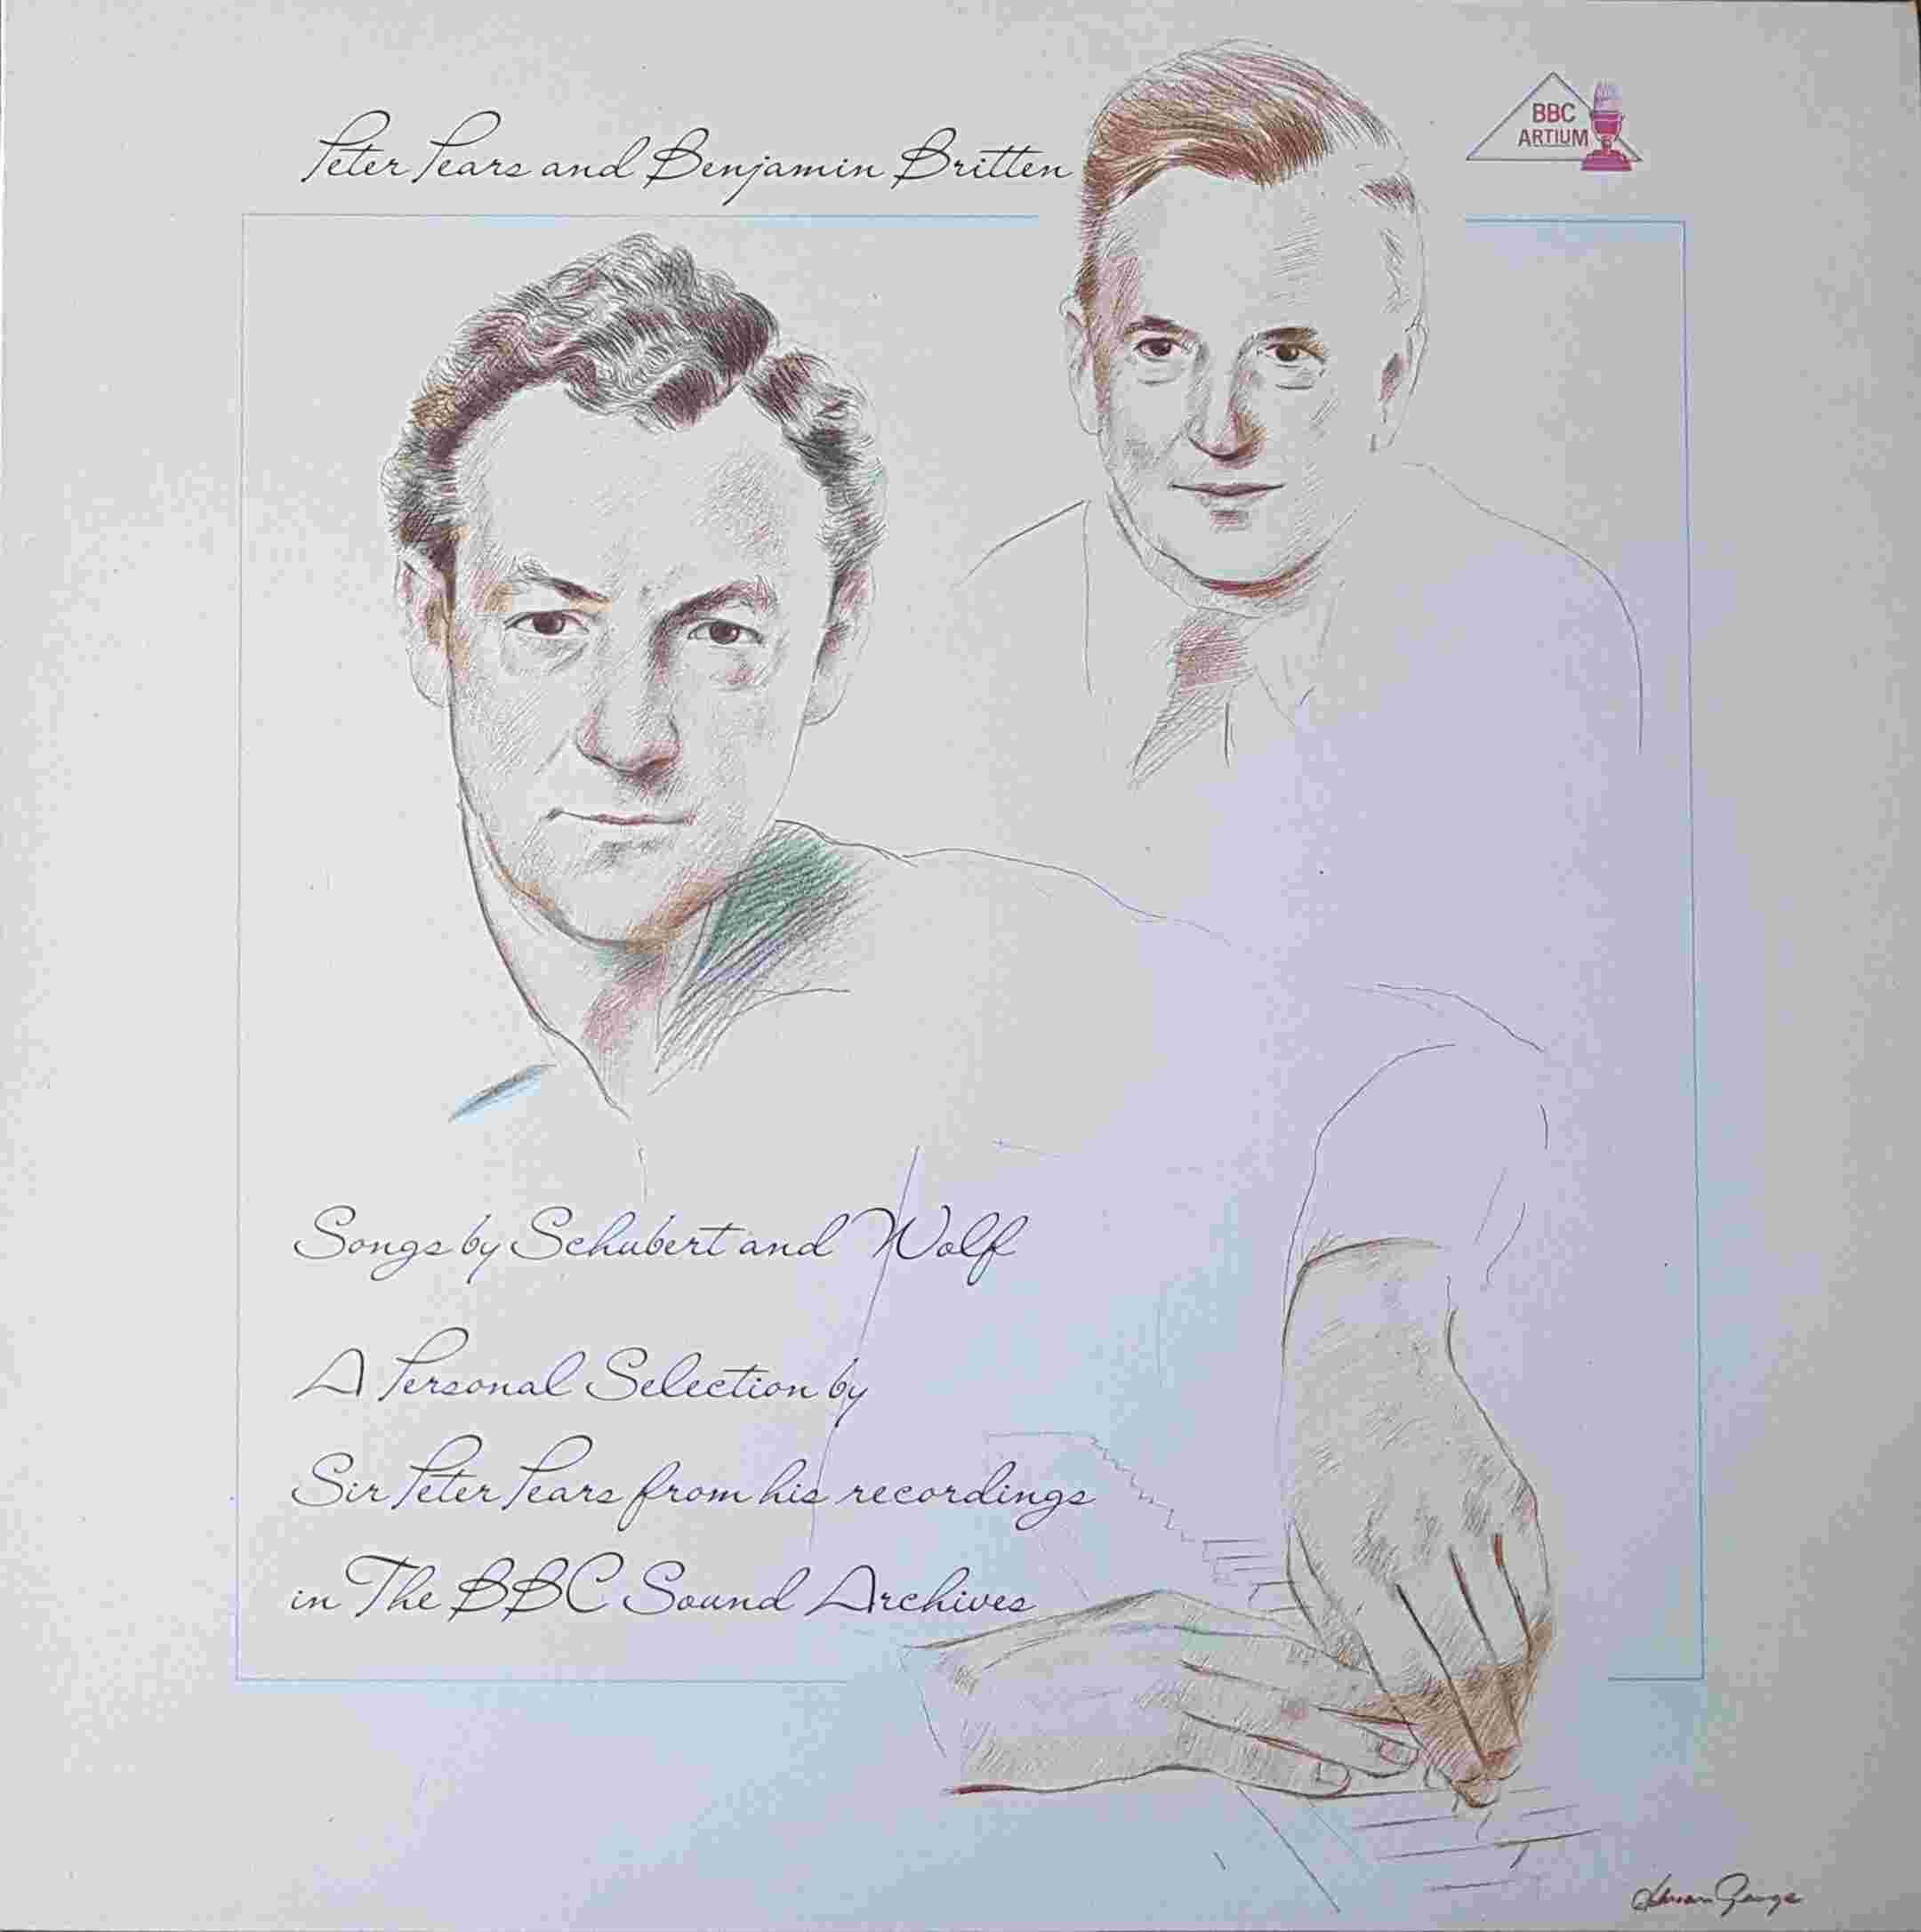 Picture of REGL 410 Peter Pears and Benjamin Britten by artist Peter Pears / Benjamin Britten from the BBC albums - Records and Tapes library